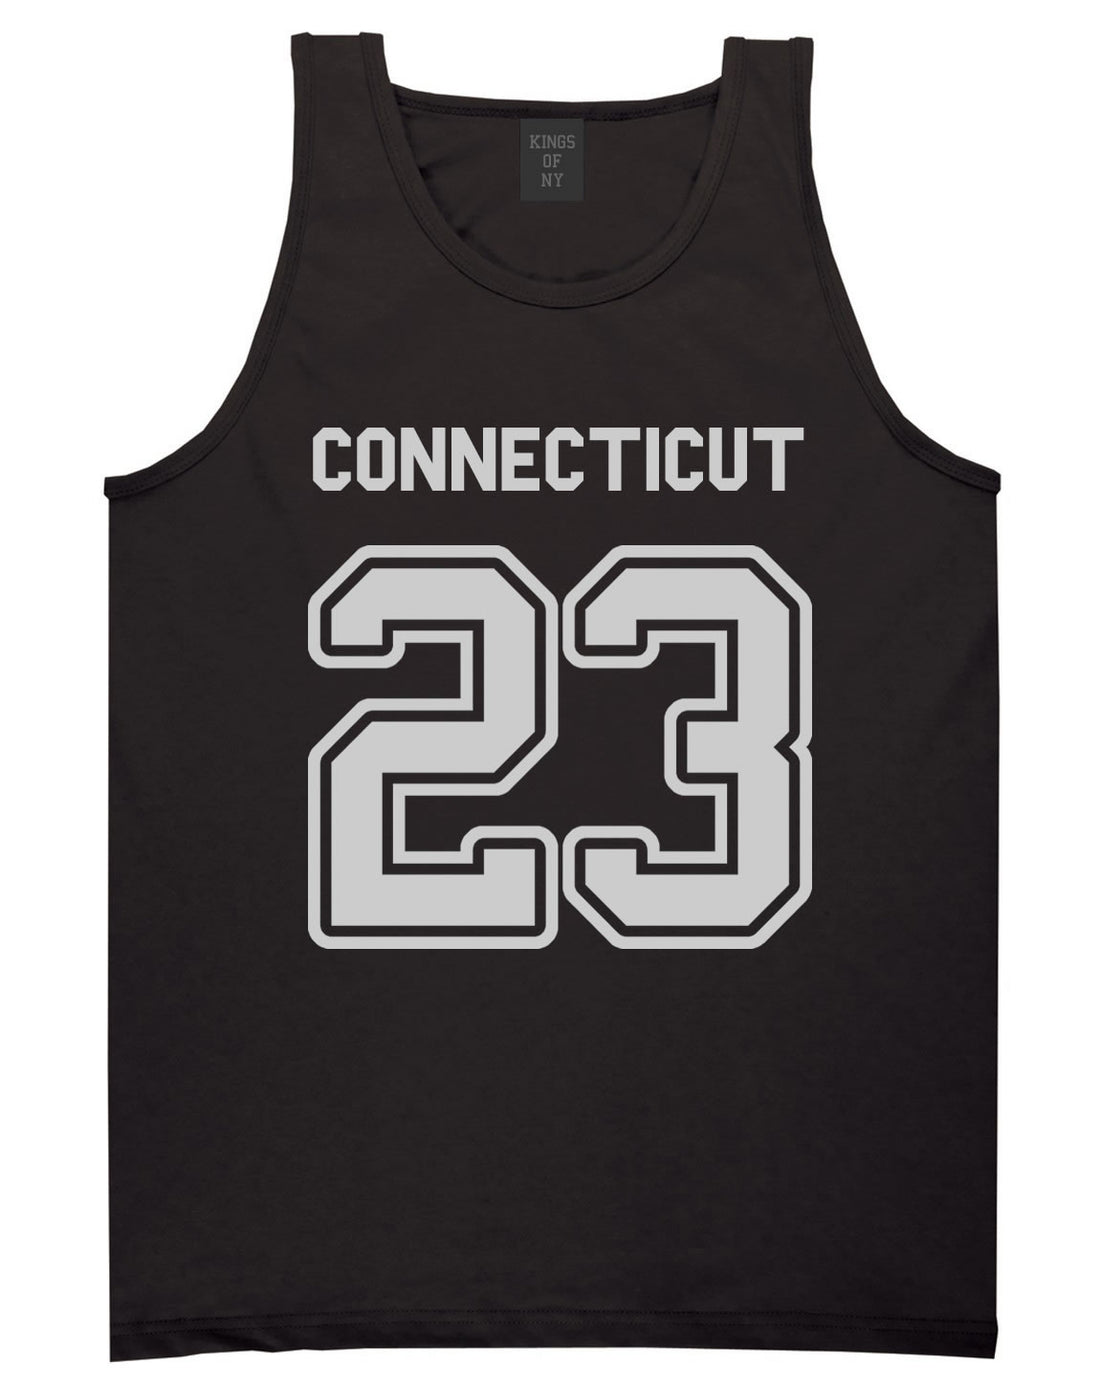 Sport Style Connecticut 23 Team State Jersey Mens Tank Top By Kings Of NY